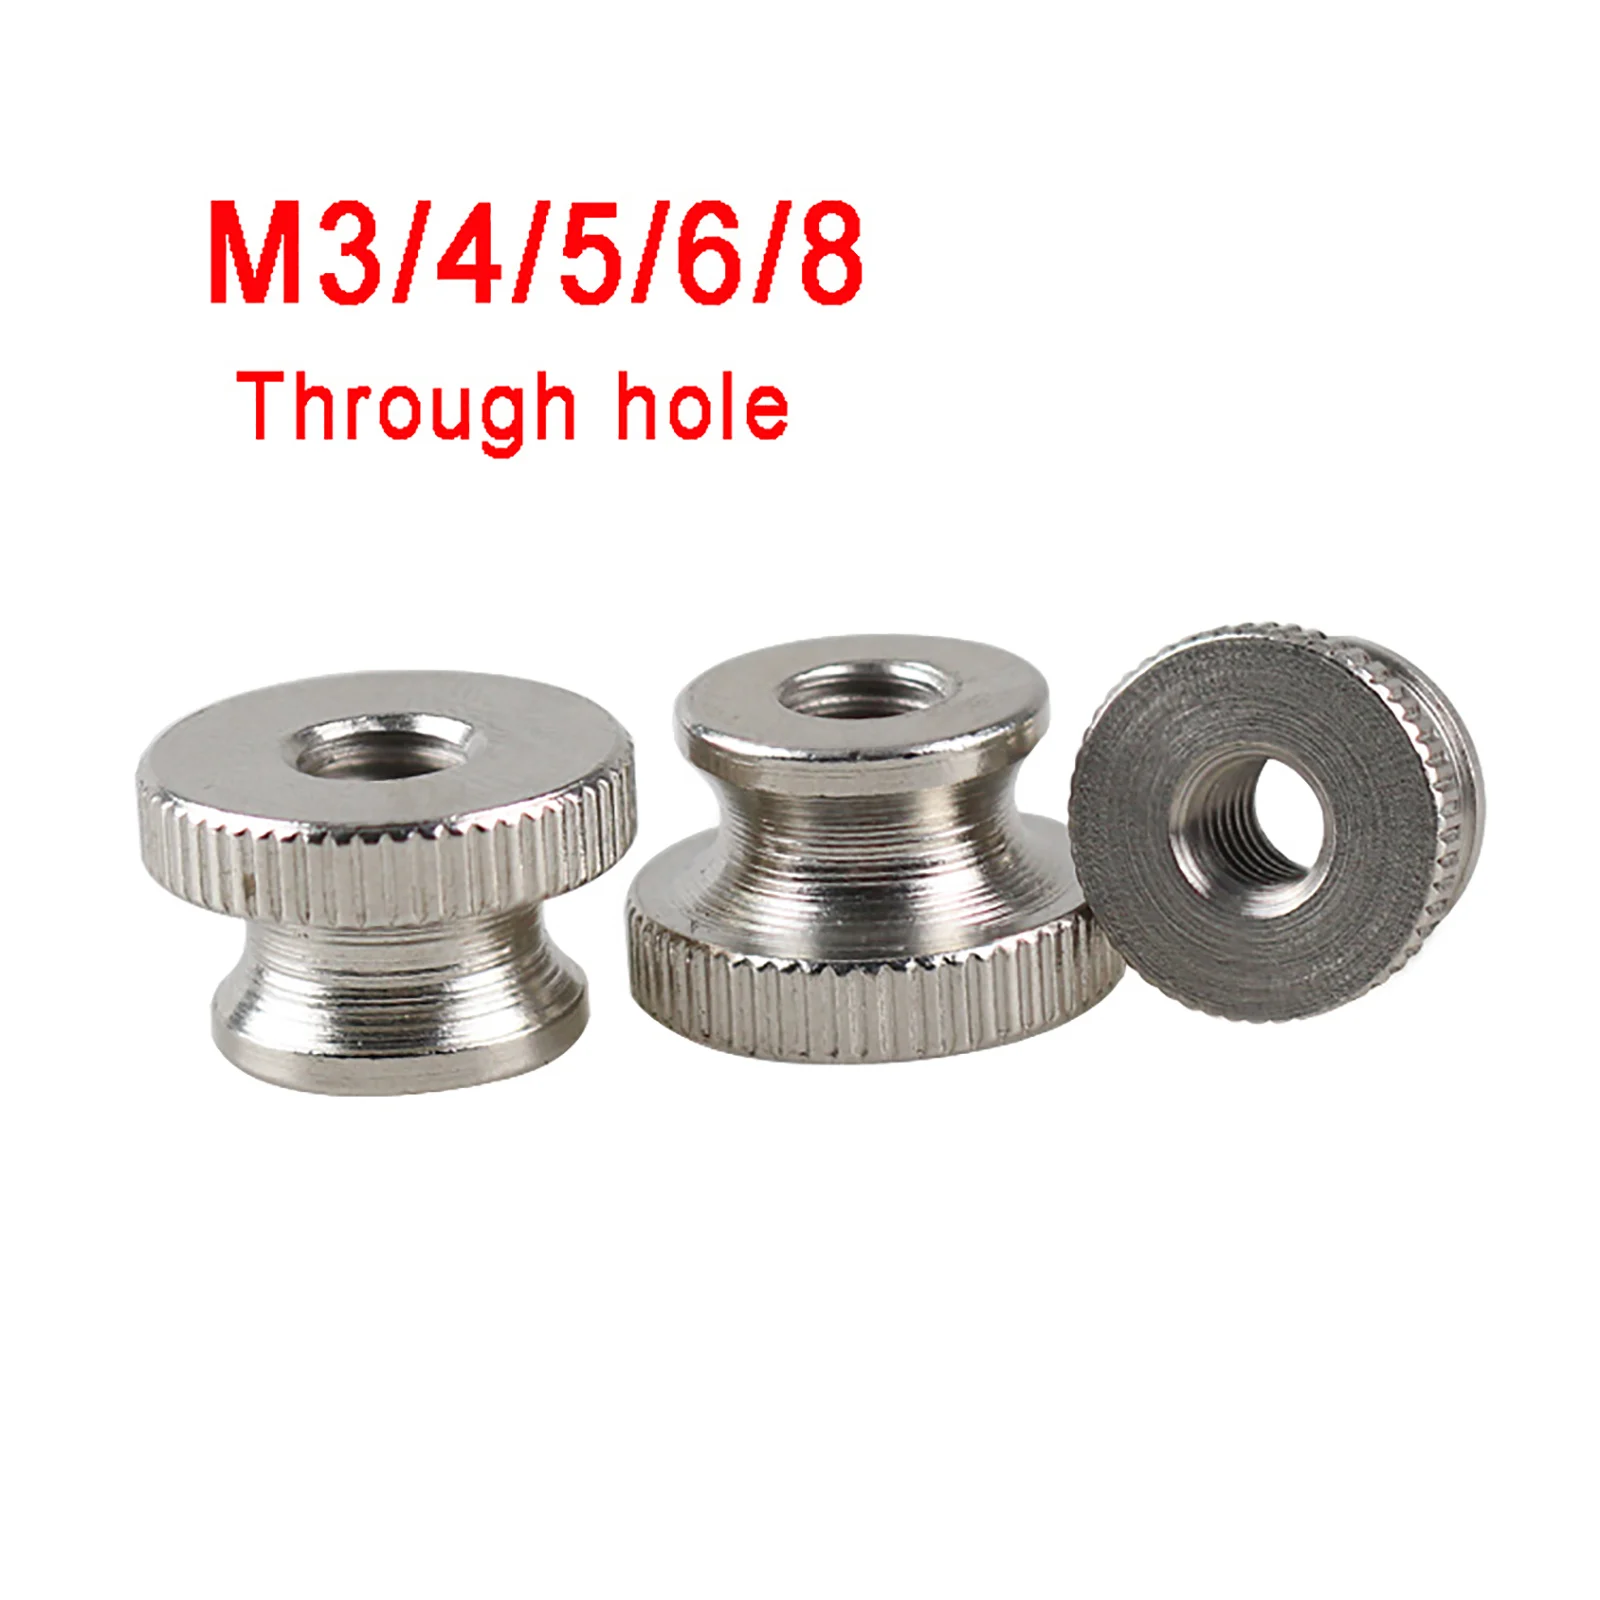 Through Hole M3 M4 M5 M6 Stainless Steel Knurled Thumb Nut Hand Grip Knob Nuts 